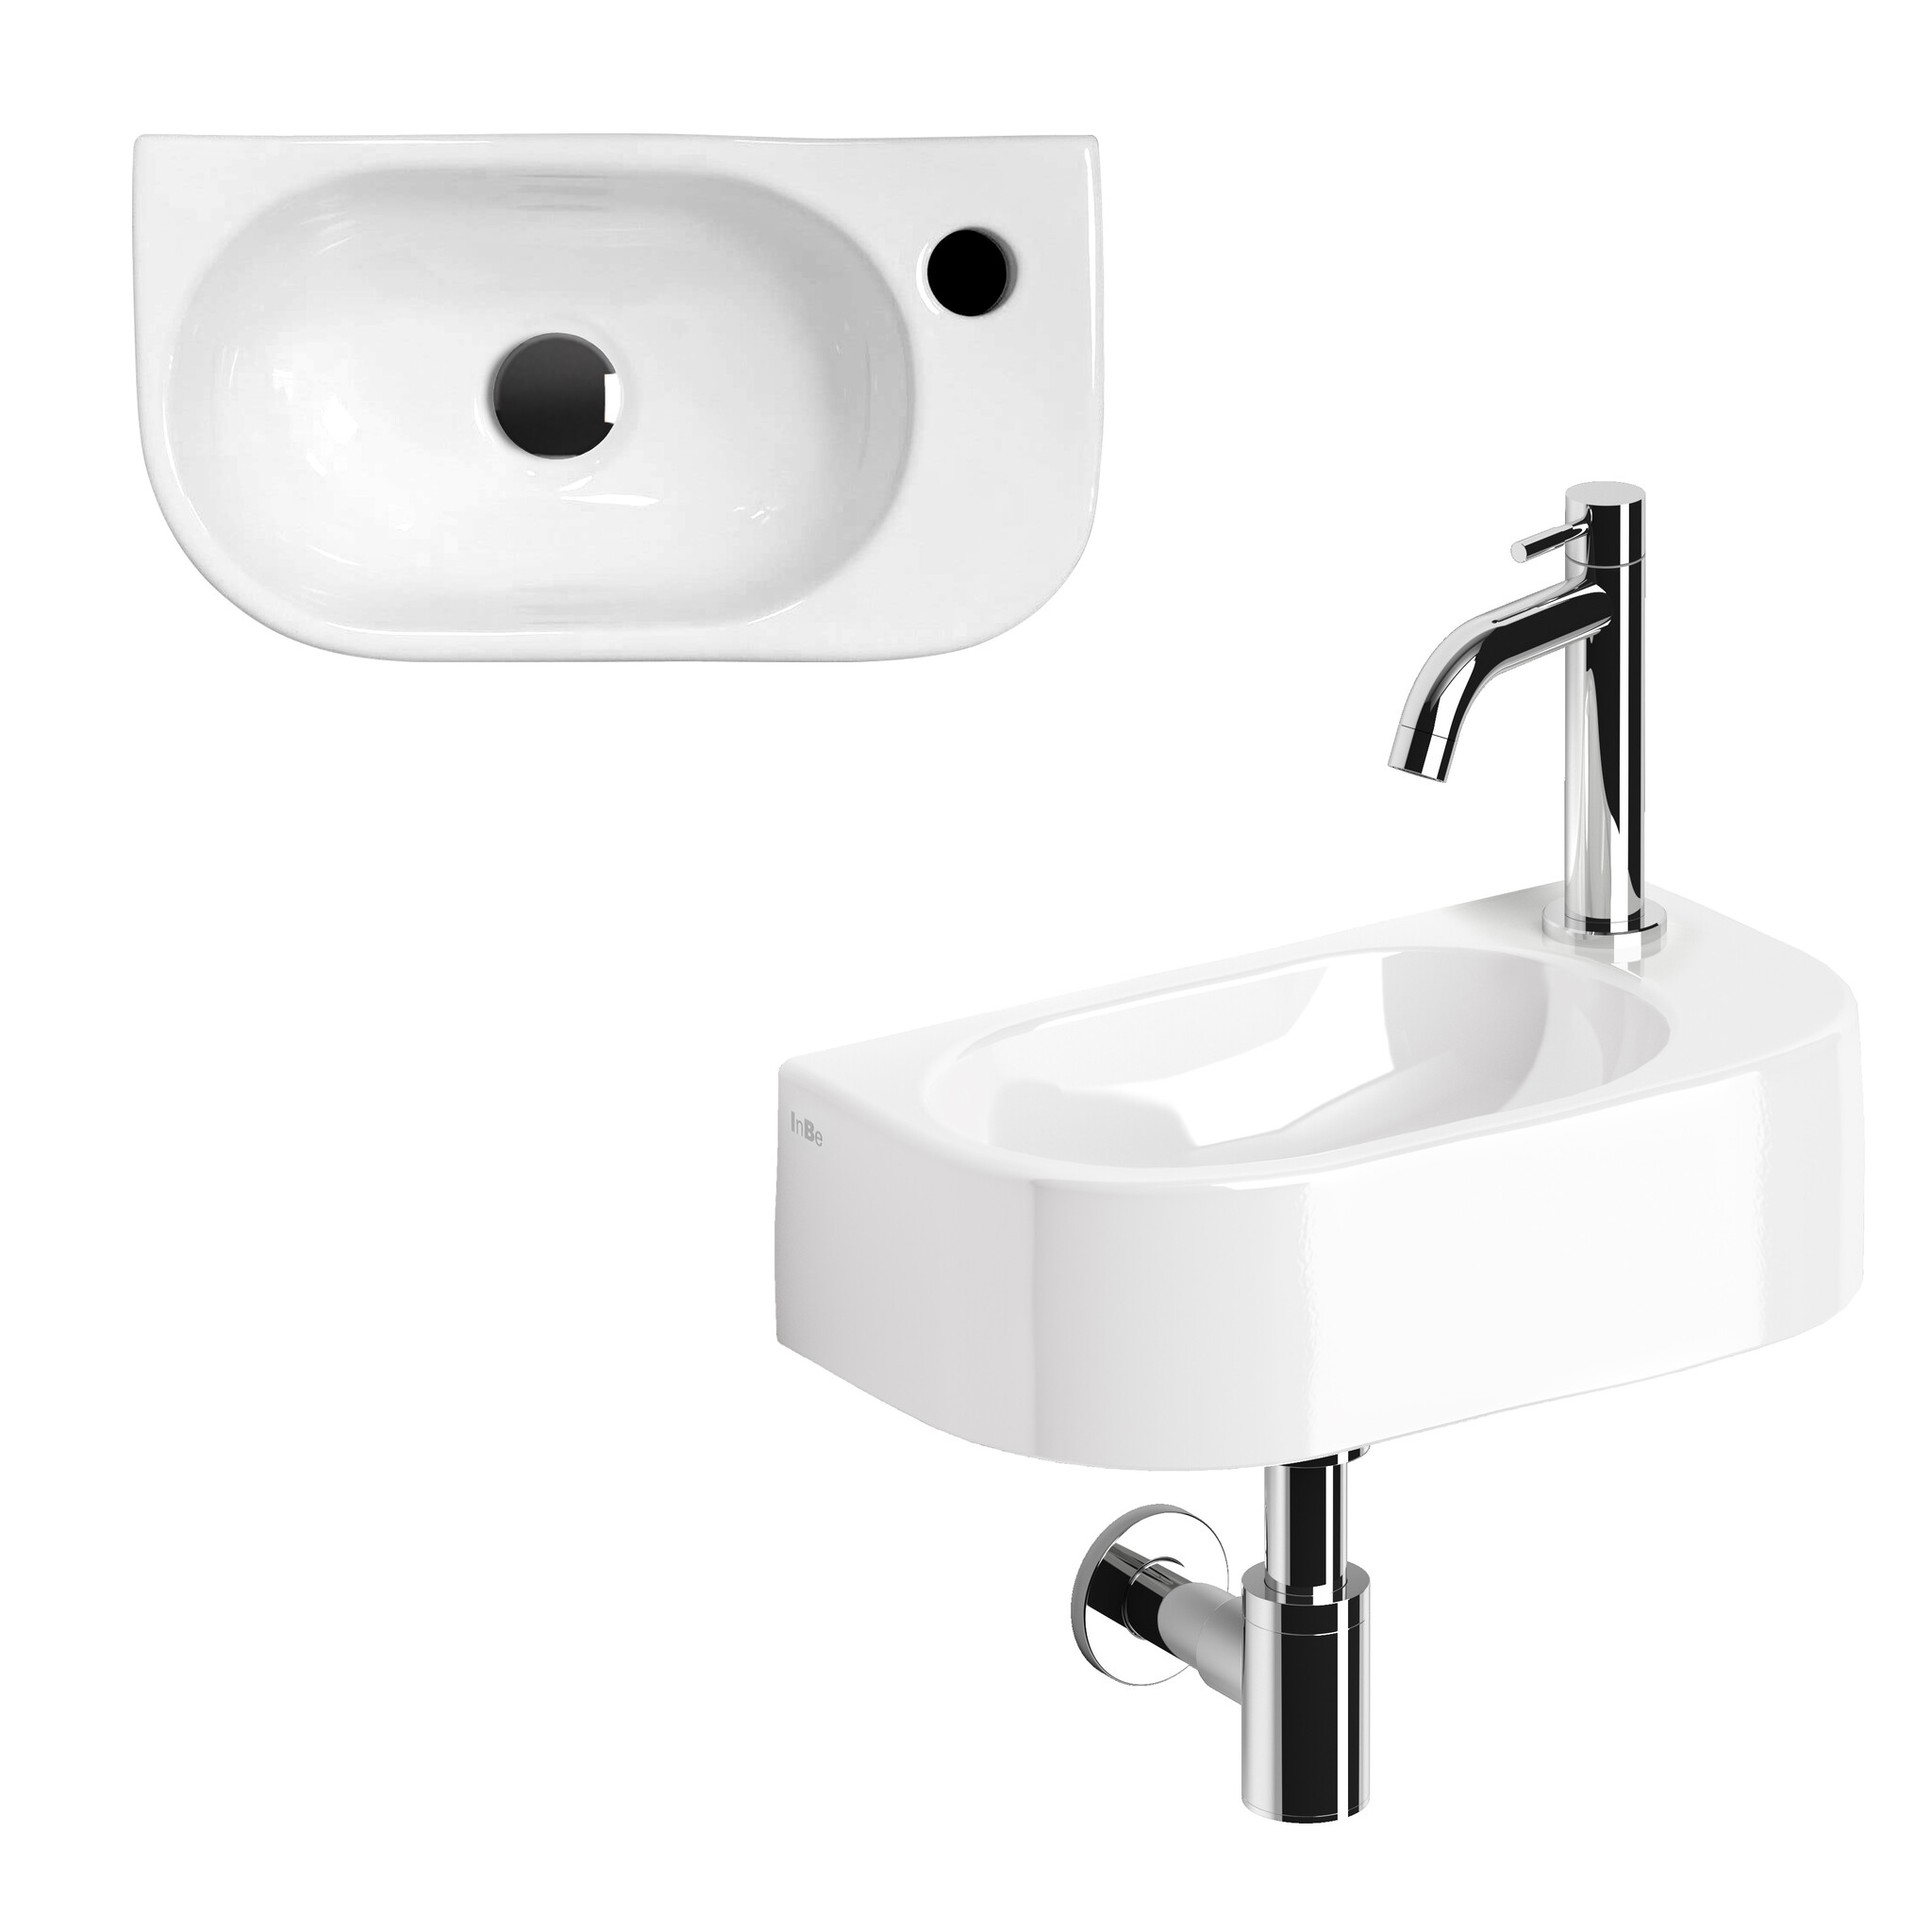 InBe InBe hand basin set 7, with hand basin, tap, drain and trap, white ceramics and chrome